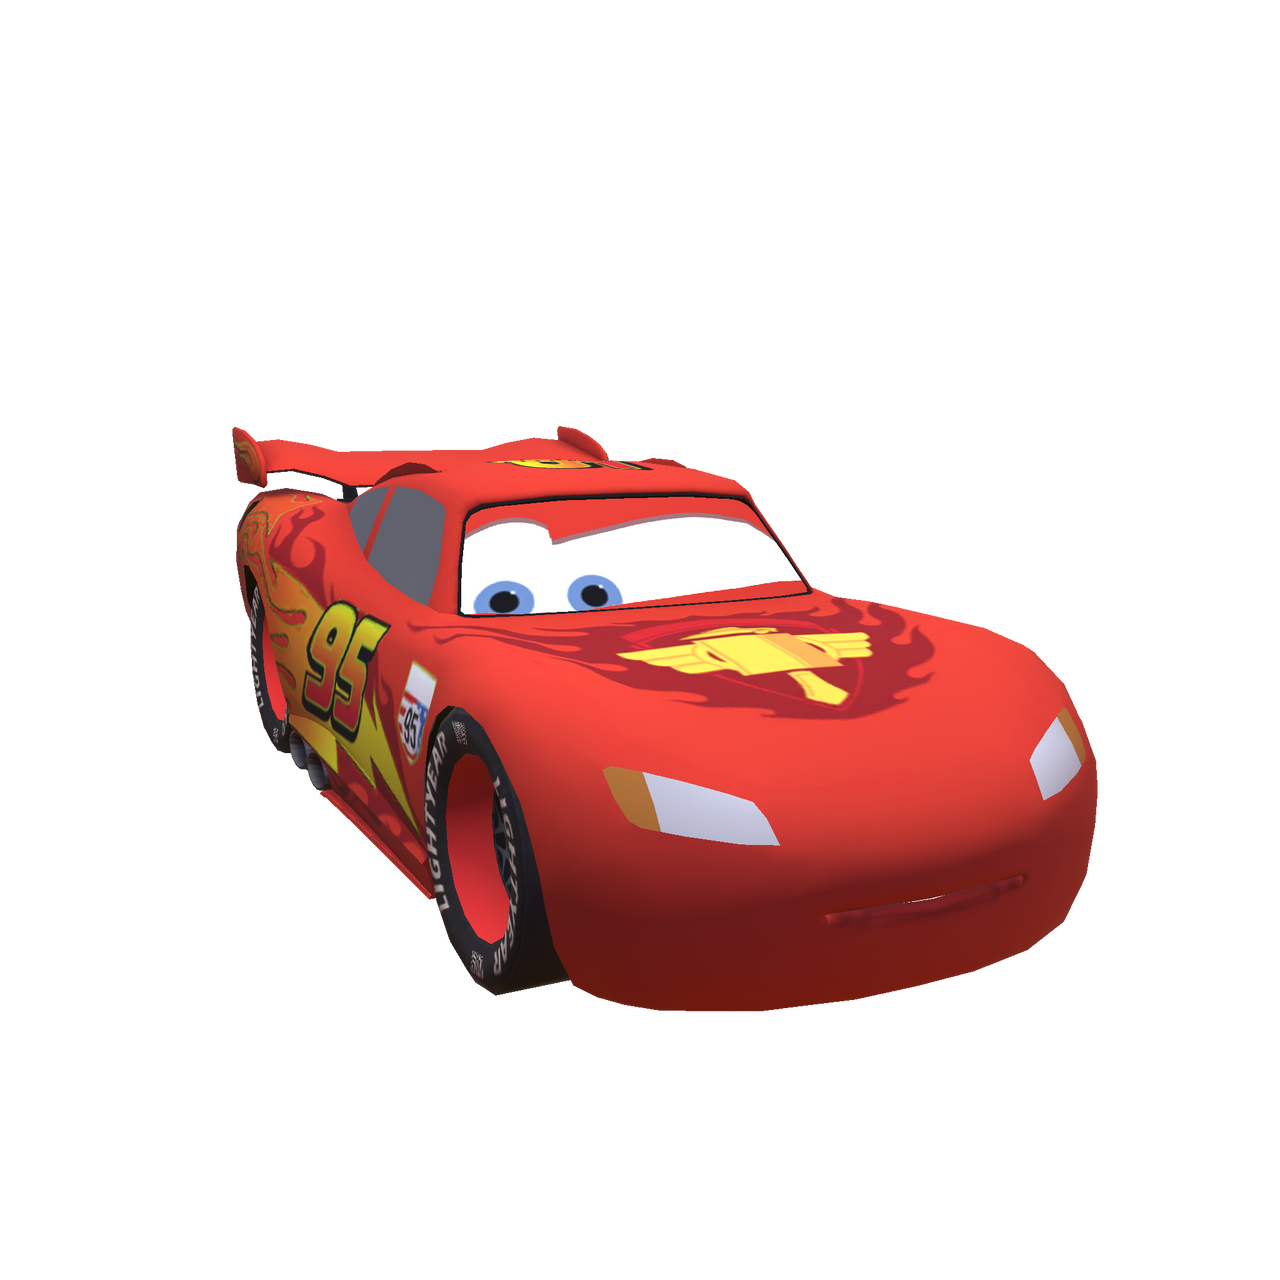 Lightning McQueen From Cars 2 Wii Model Download by Kylewithem on DeviantArt